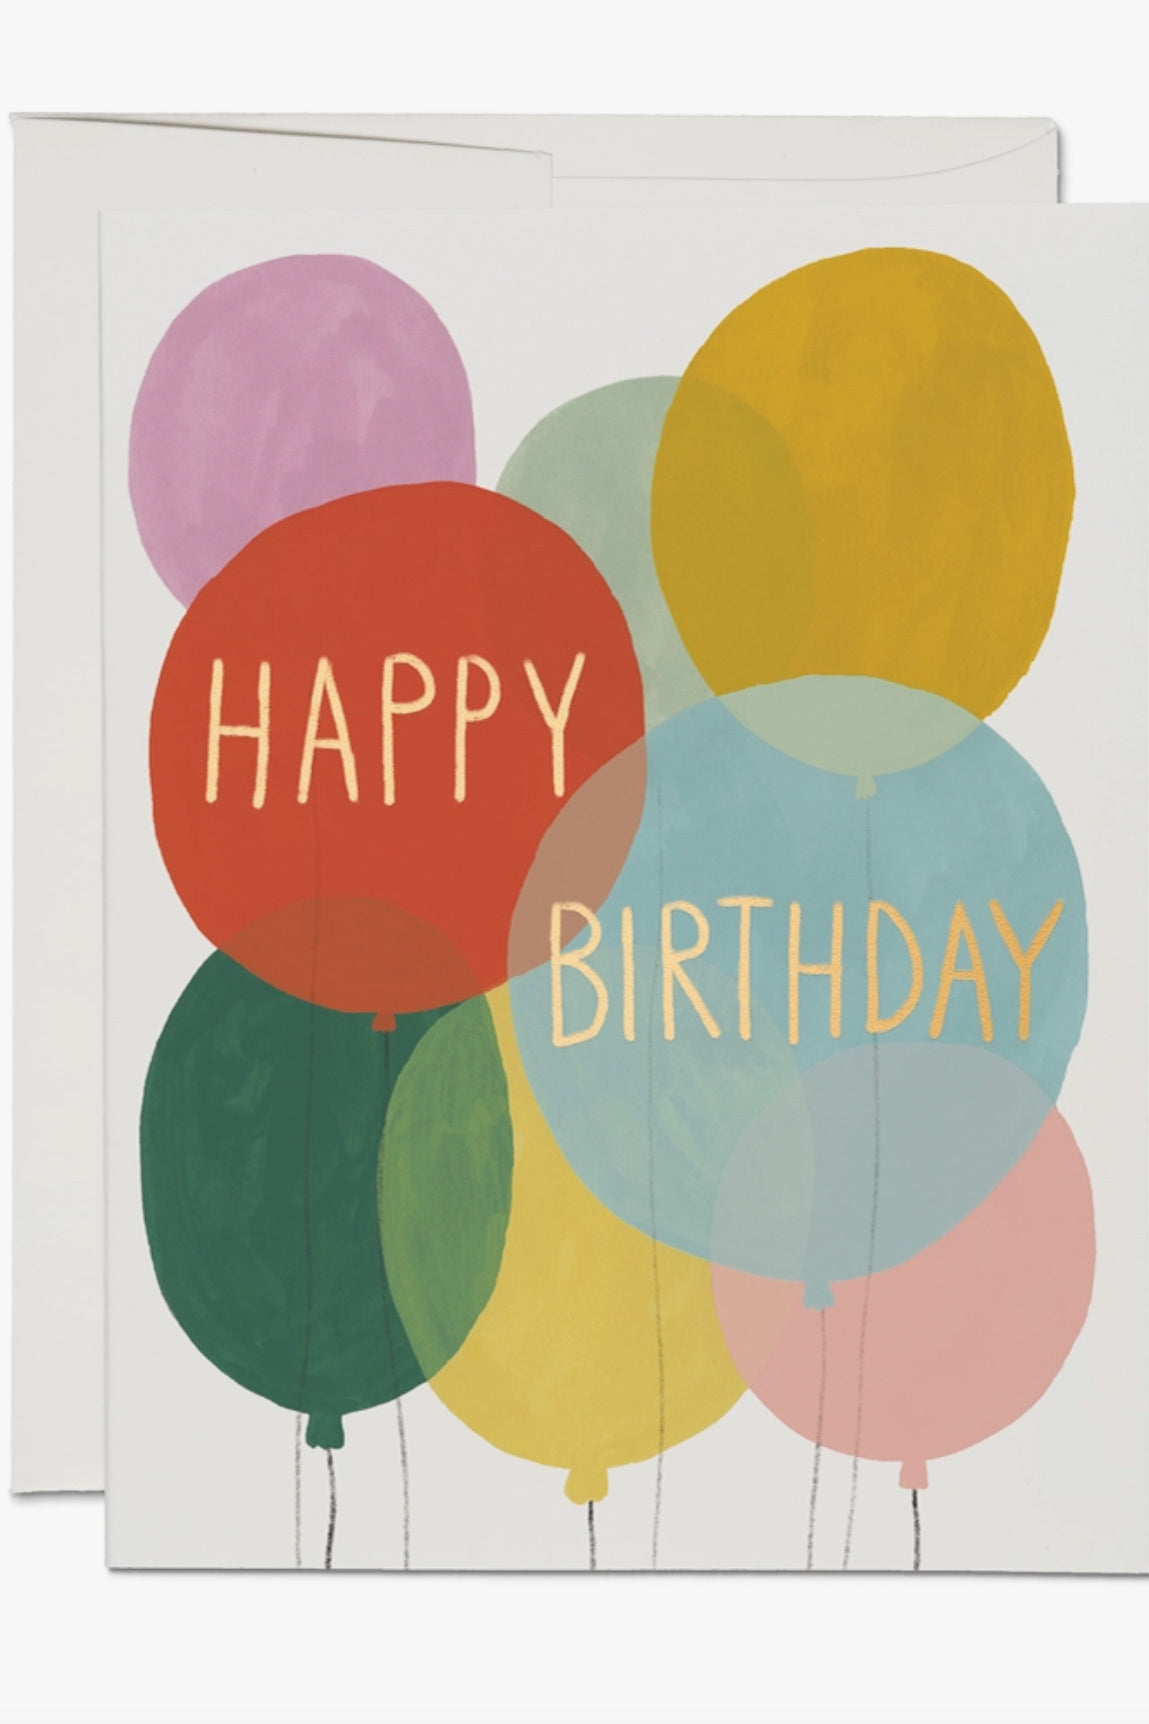 Red Cap Cards - Birthday Balloons Card